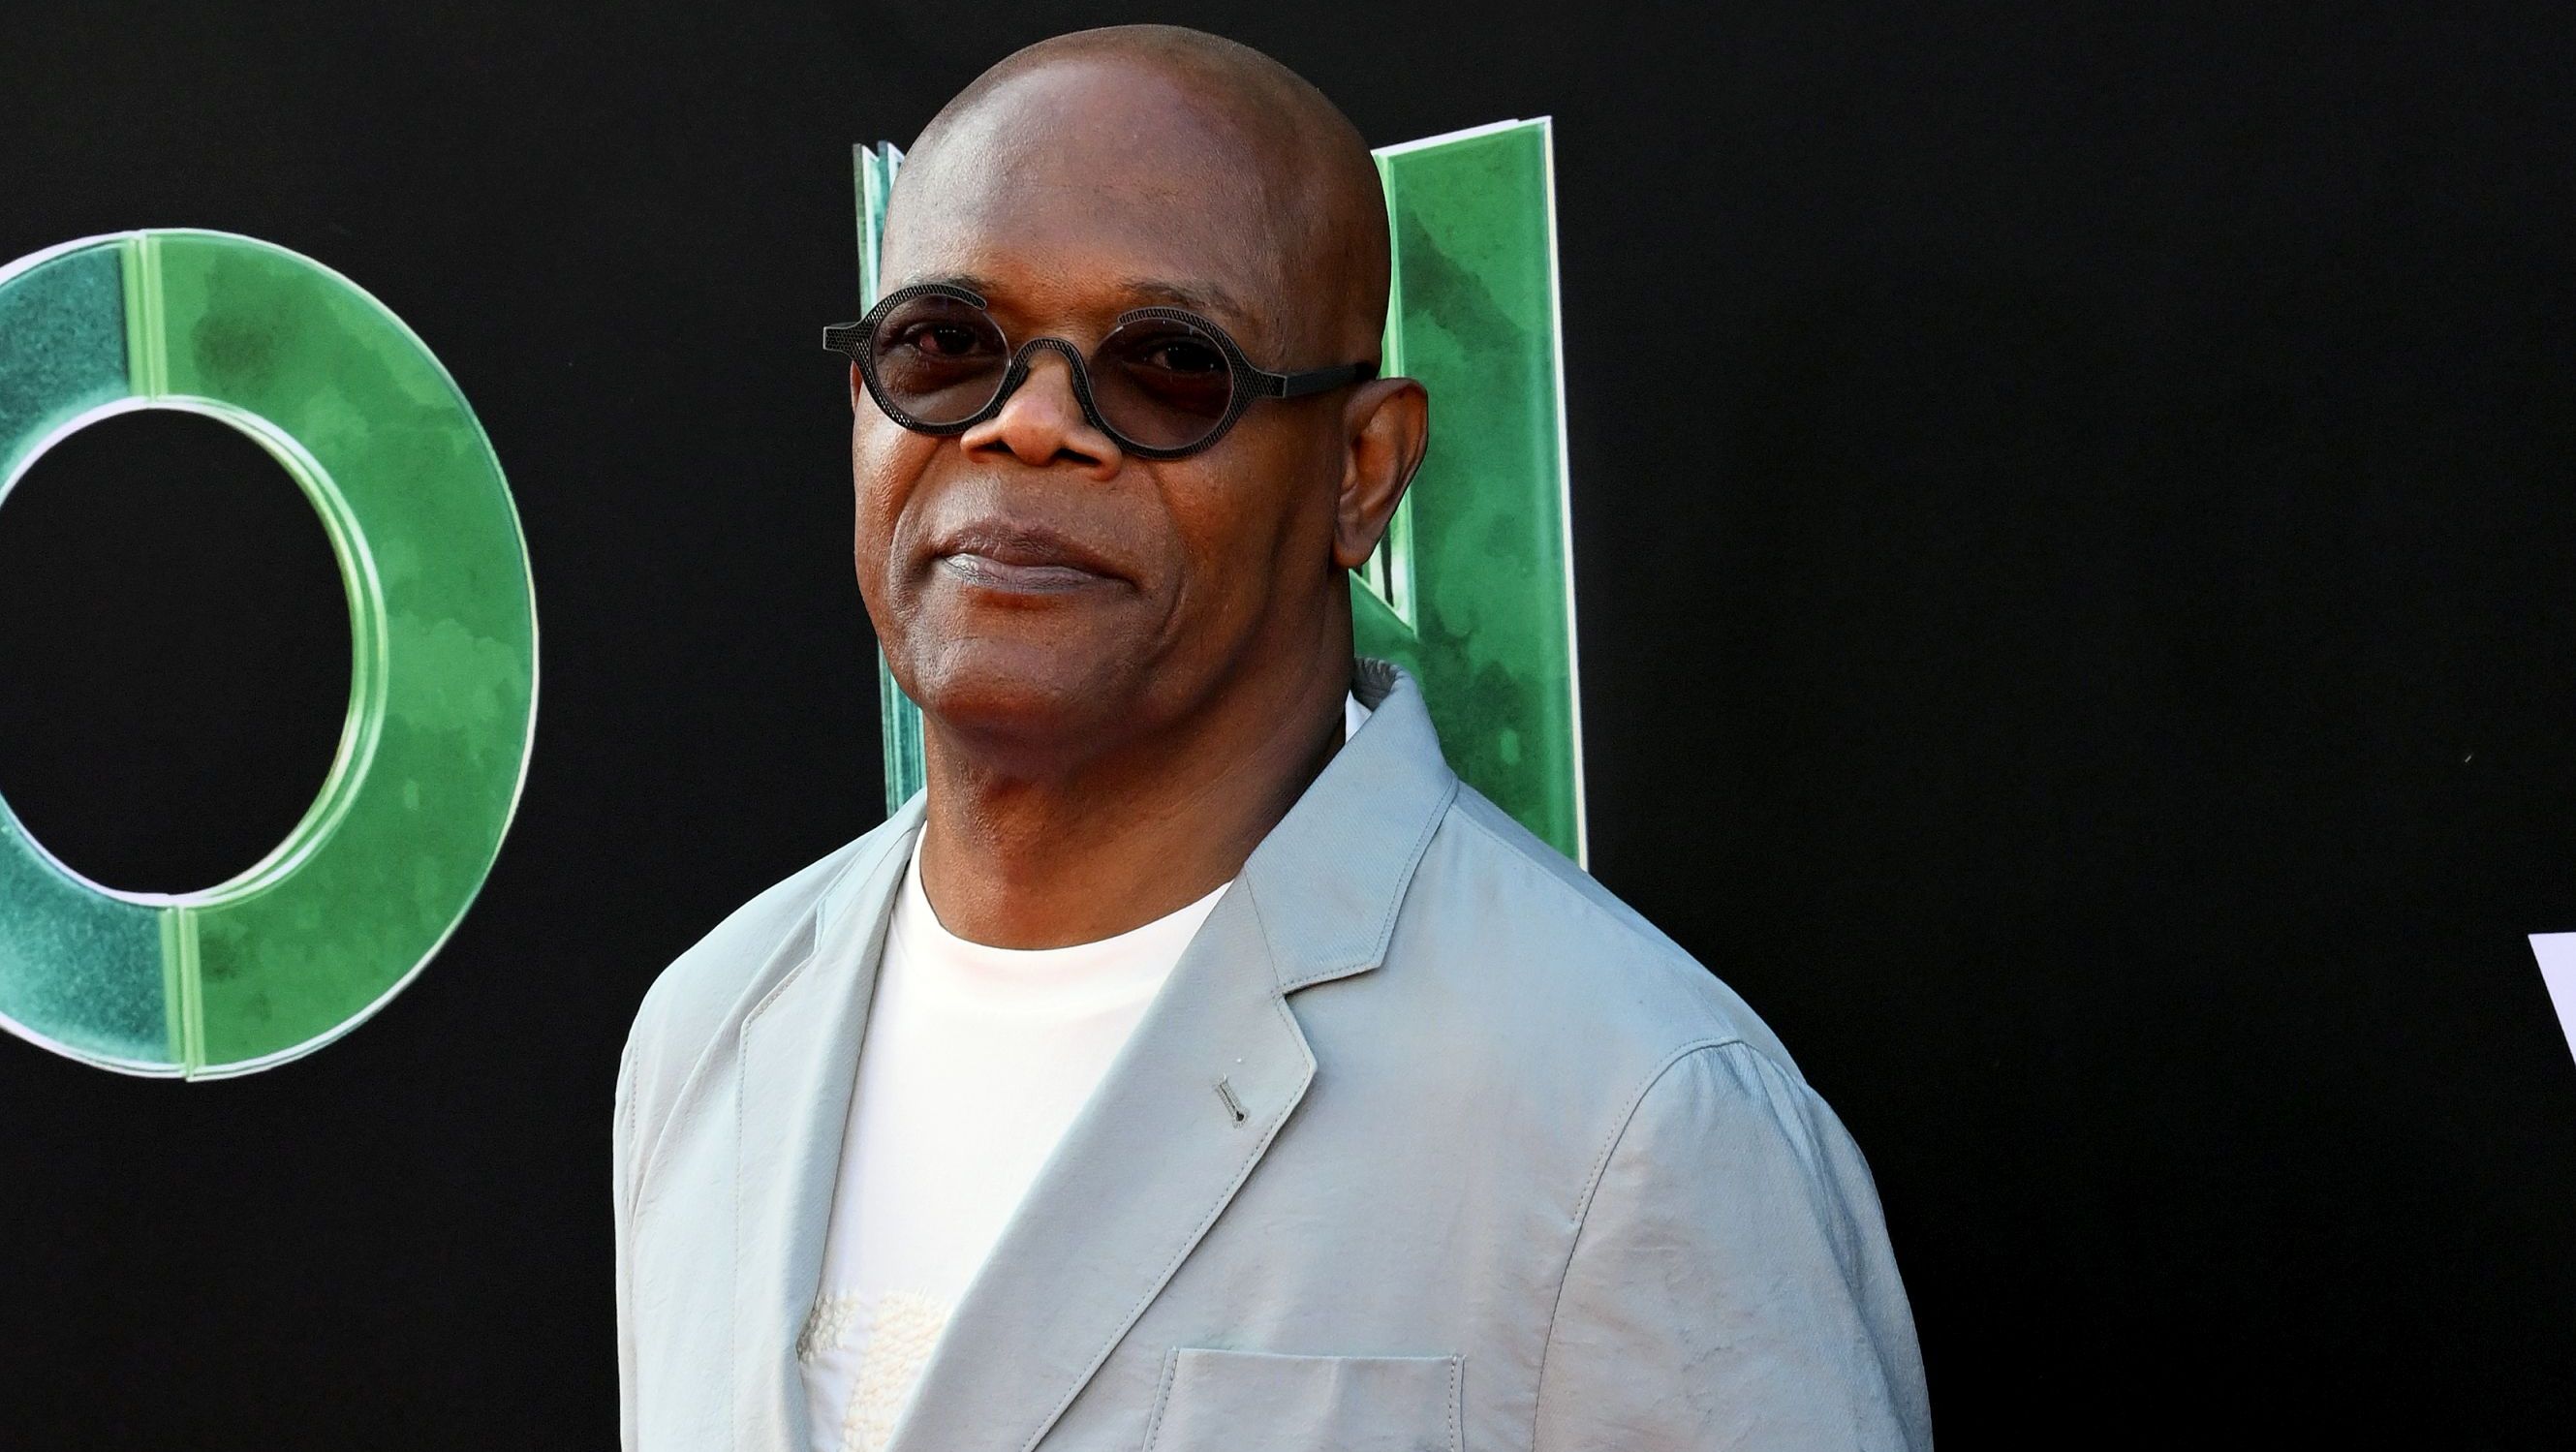 Samuel L. Jackson To Lead Alongside ‘Crazy Rich Asians’ Star Henry Golding in ‘Head Games’